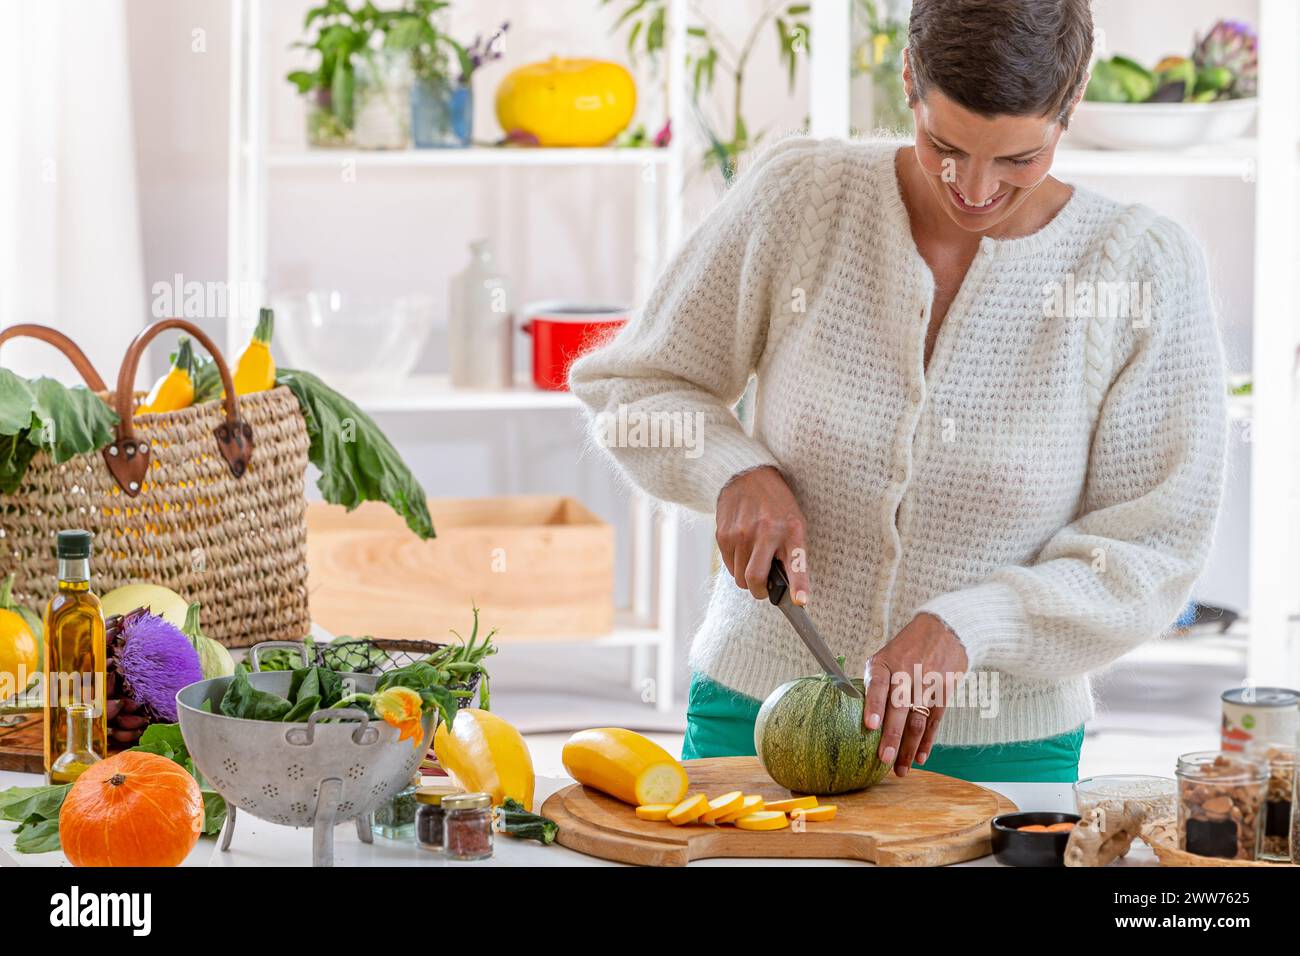 Young woman in her kitchen surrounded by organic vegetables. Stock Photo